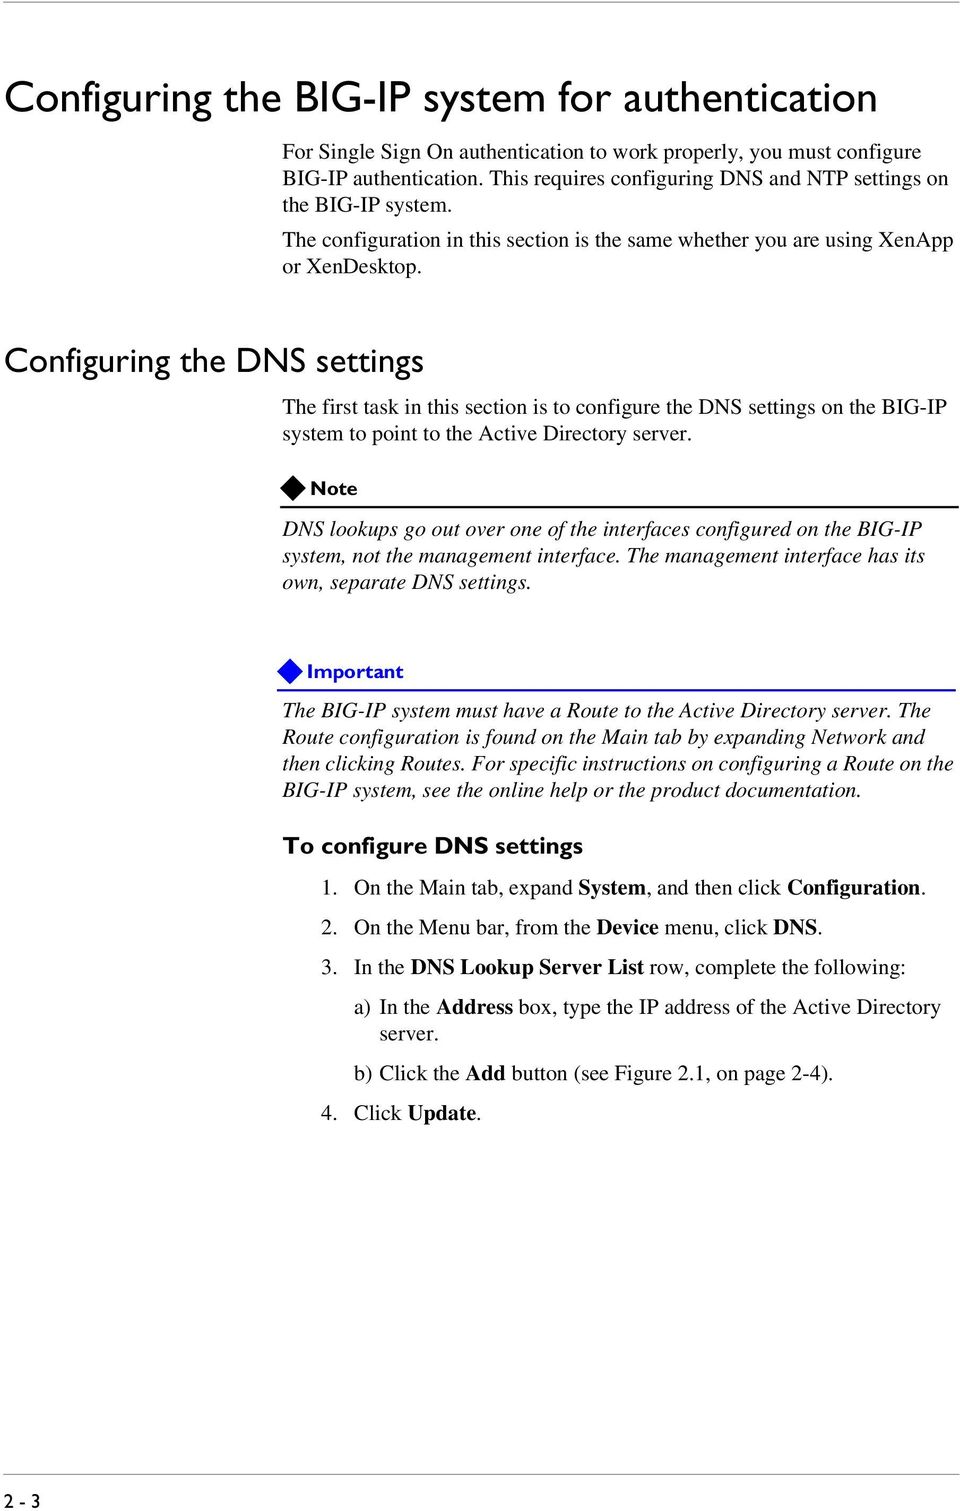 Configuring the DNS settings The first task in this section is to configure the DNS settings on the BIG-IP system to point to the Active Directory server.